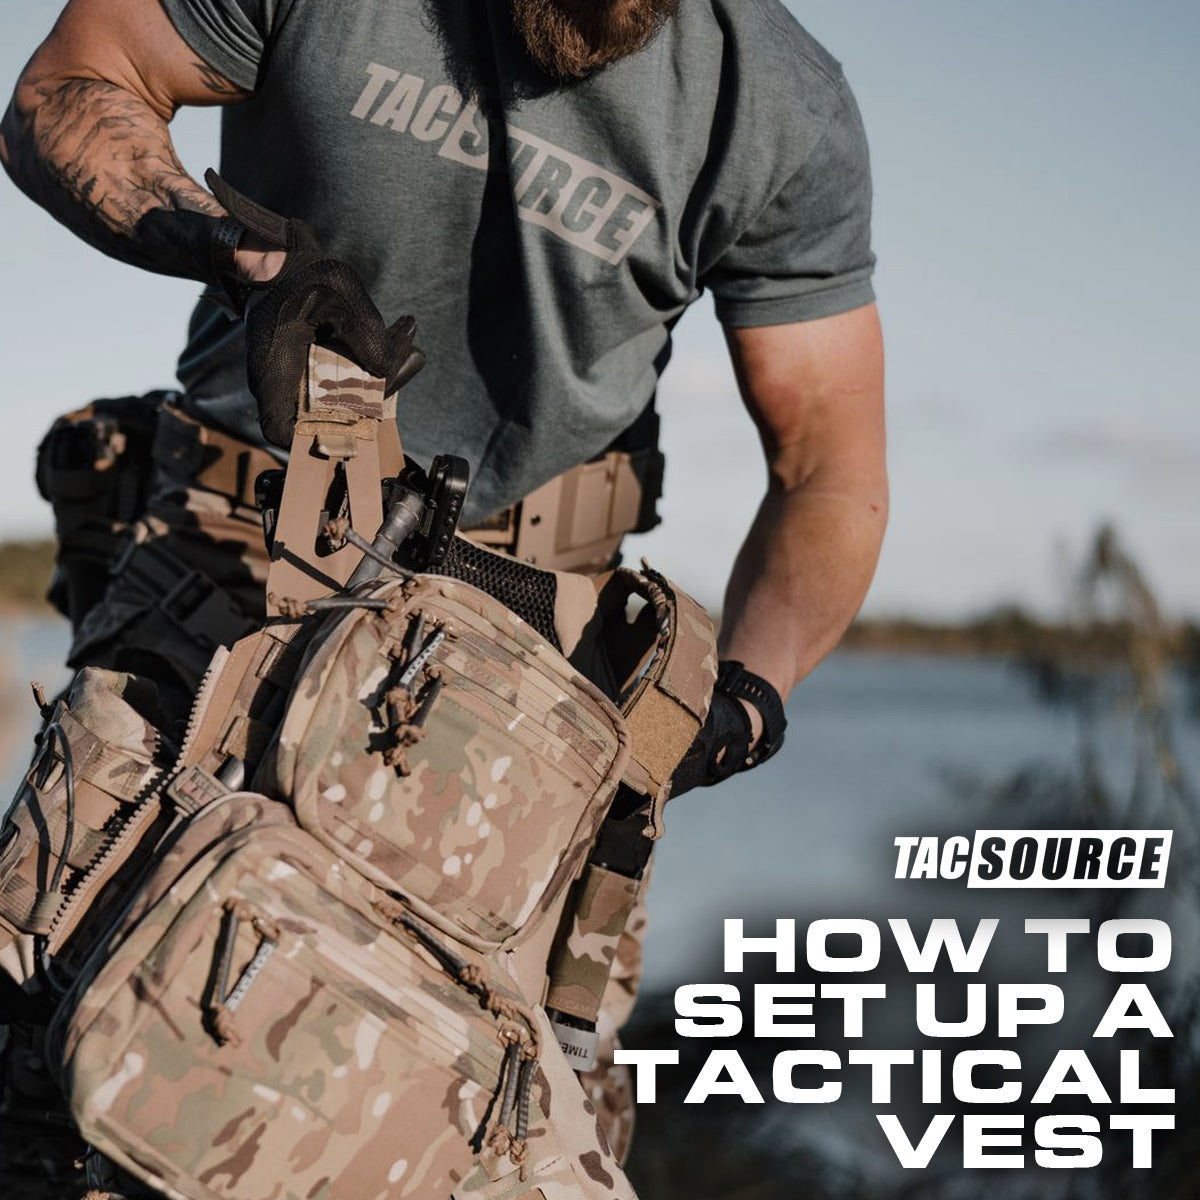 How to Set up a Tactical Vest